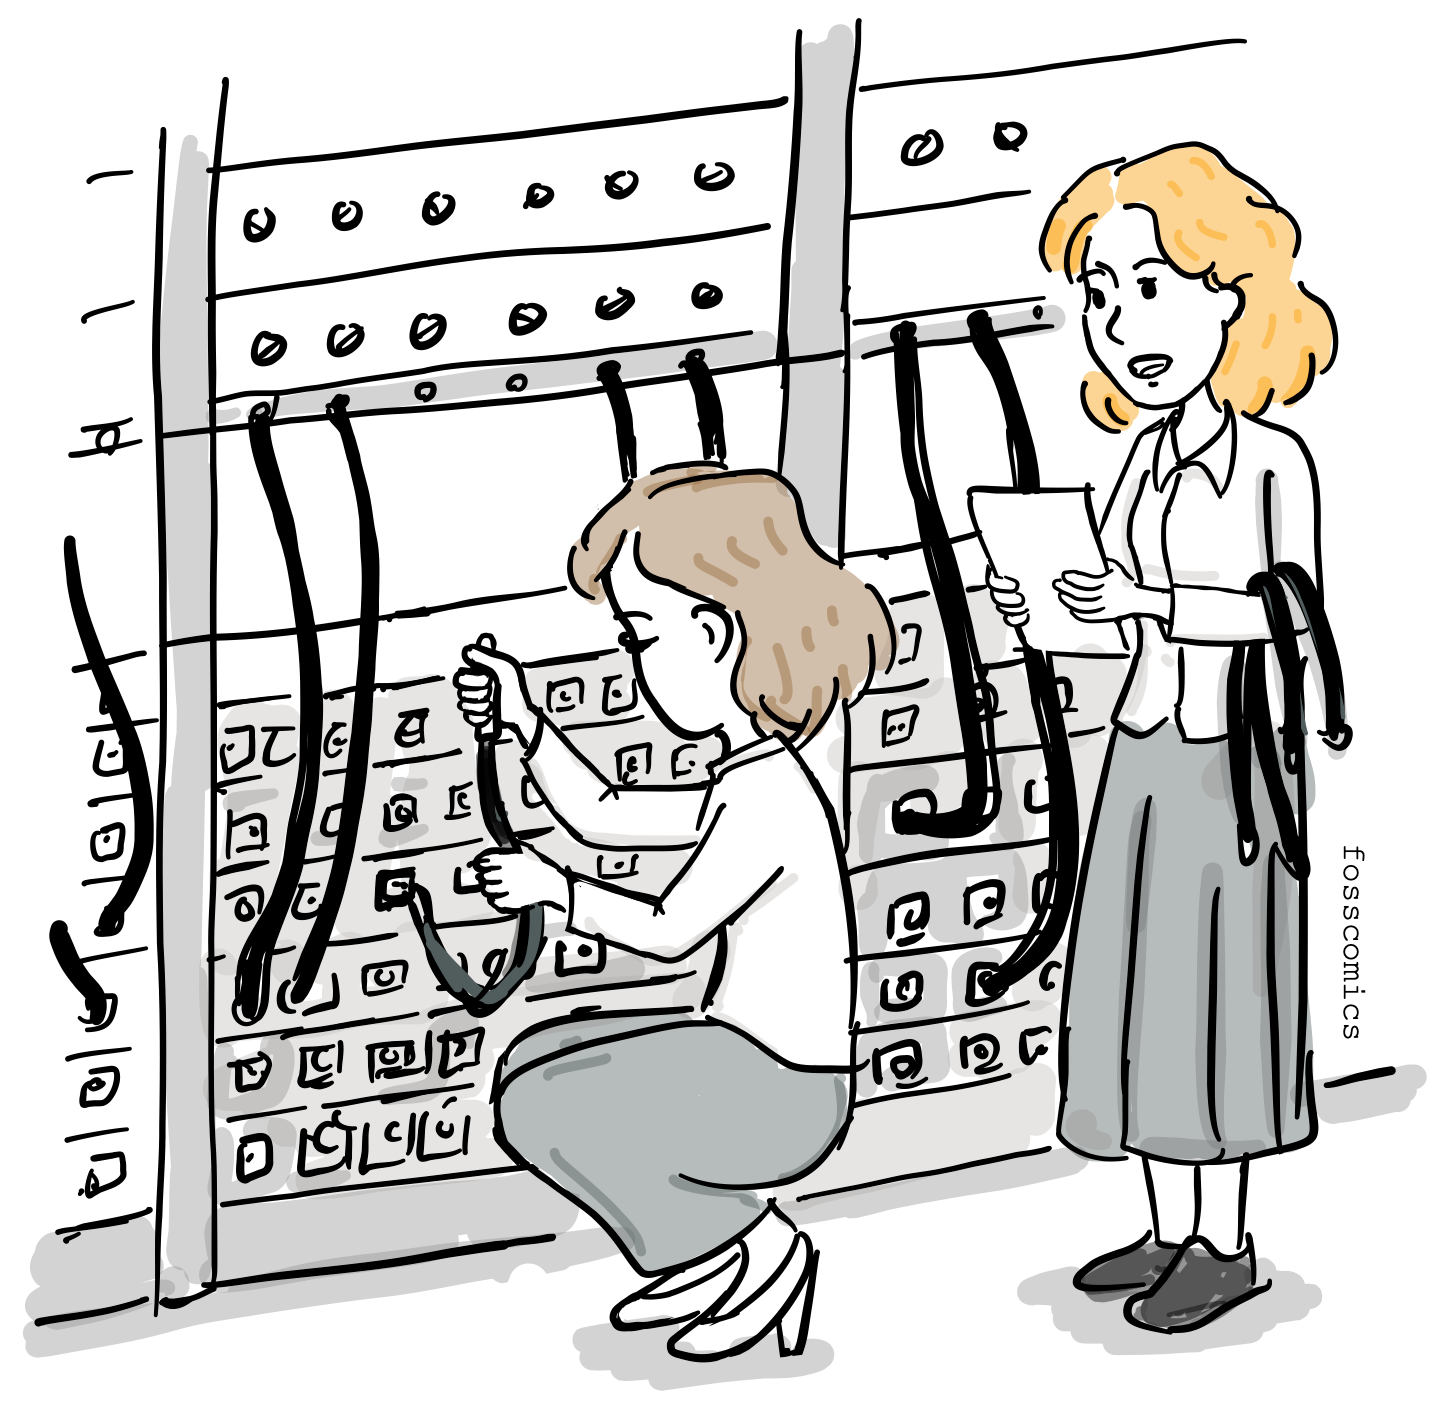 Two women technicians are programming in front of an ENIAC computer